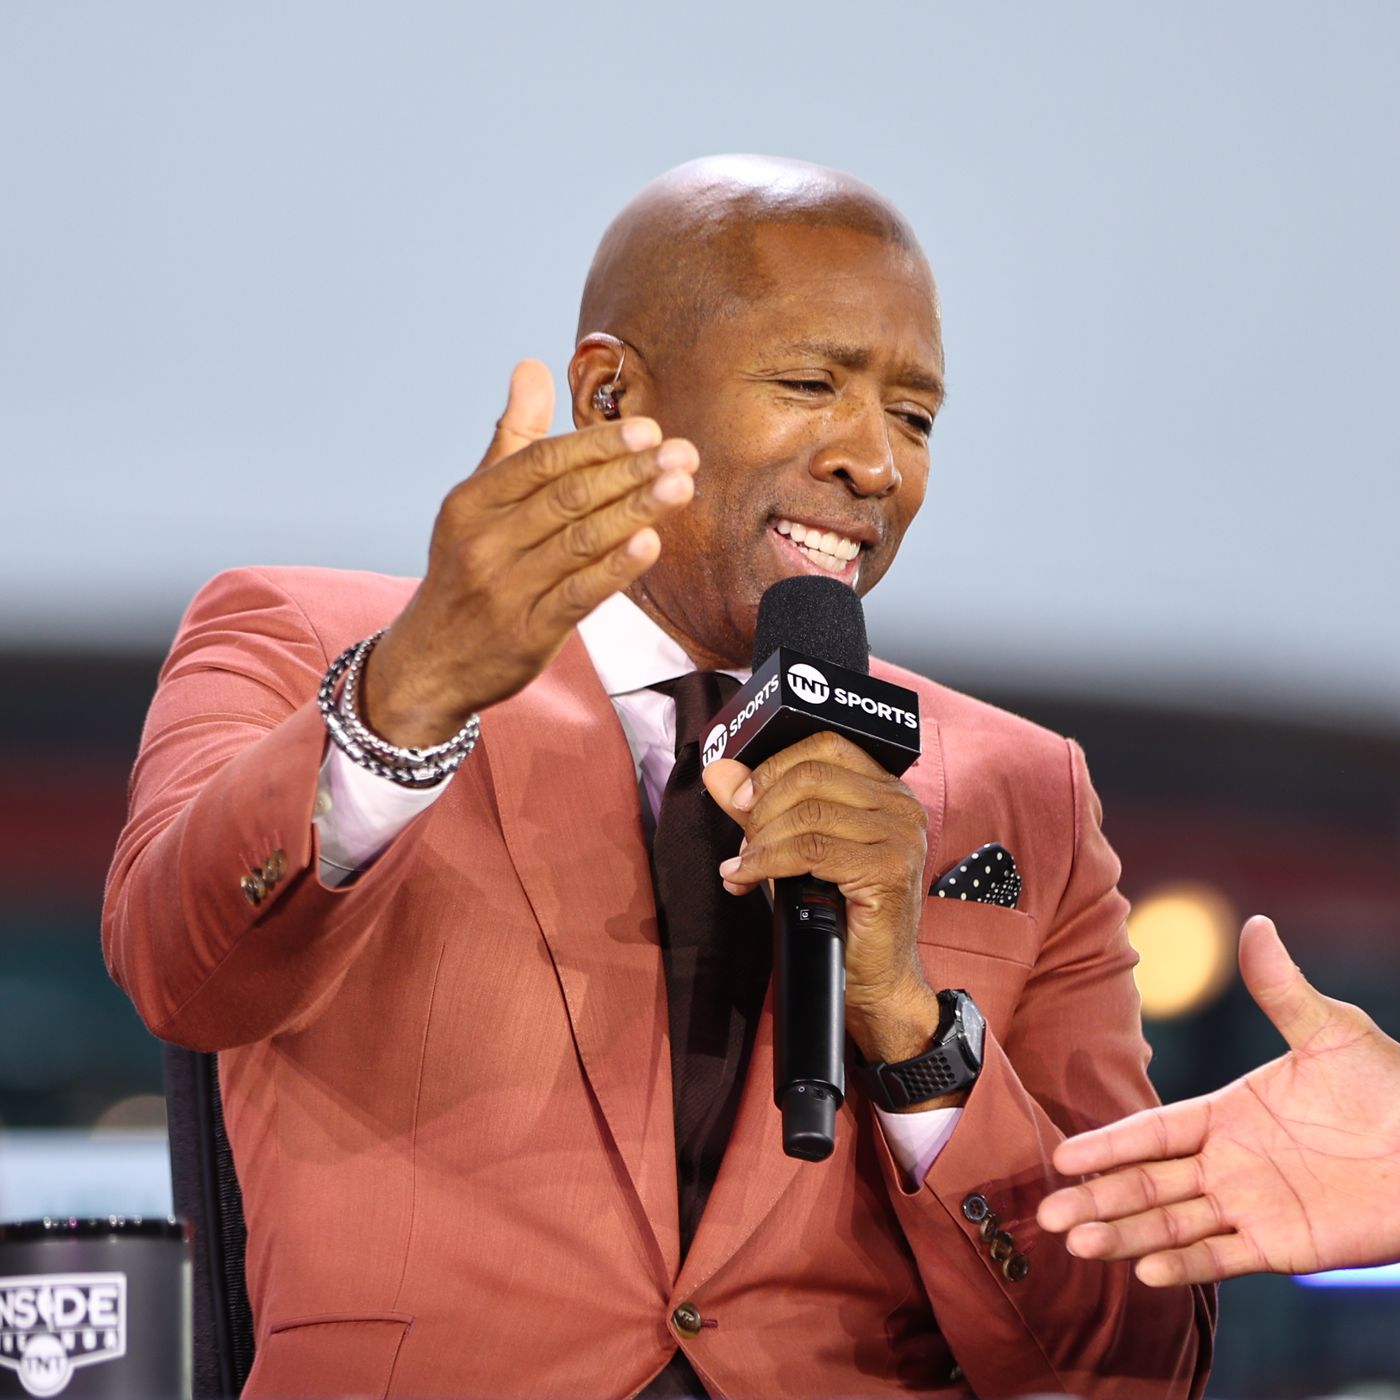 Kenny Smith Ditches Shirt For Beach Day With Bikini Beauty